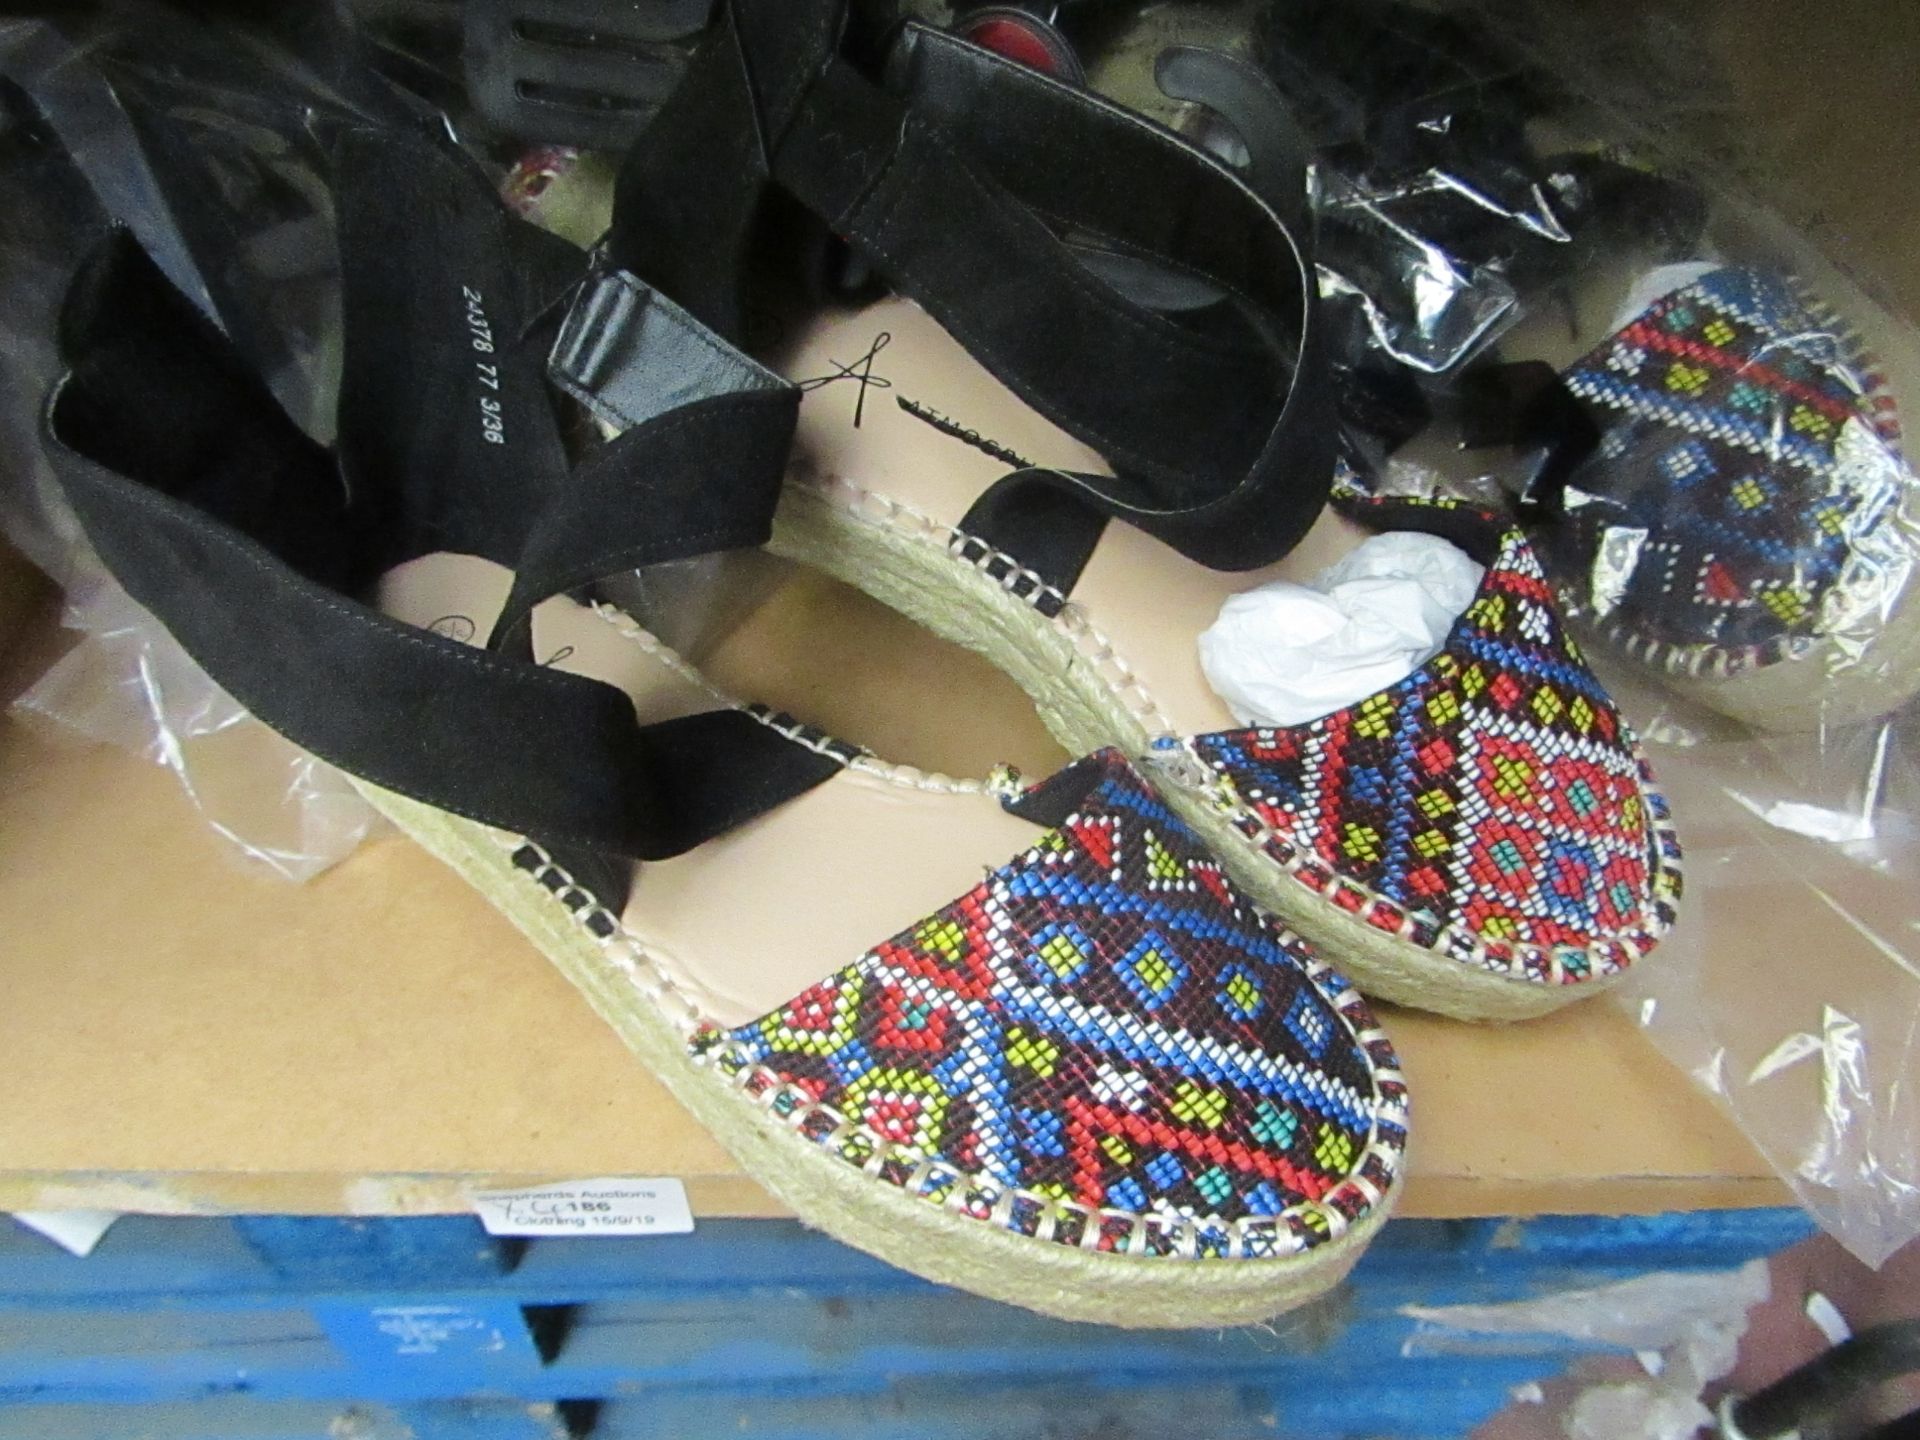 4 x Pairs of Ladies Espadrilles Size 7 Shoes.See Pic for Design.New & Packaged